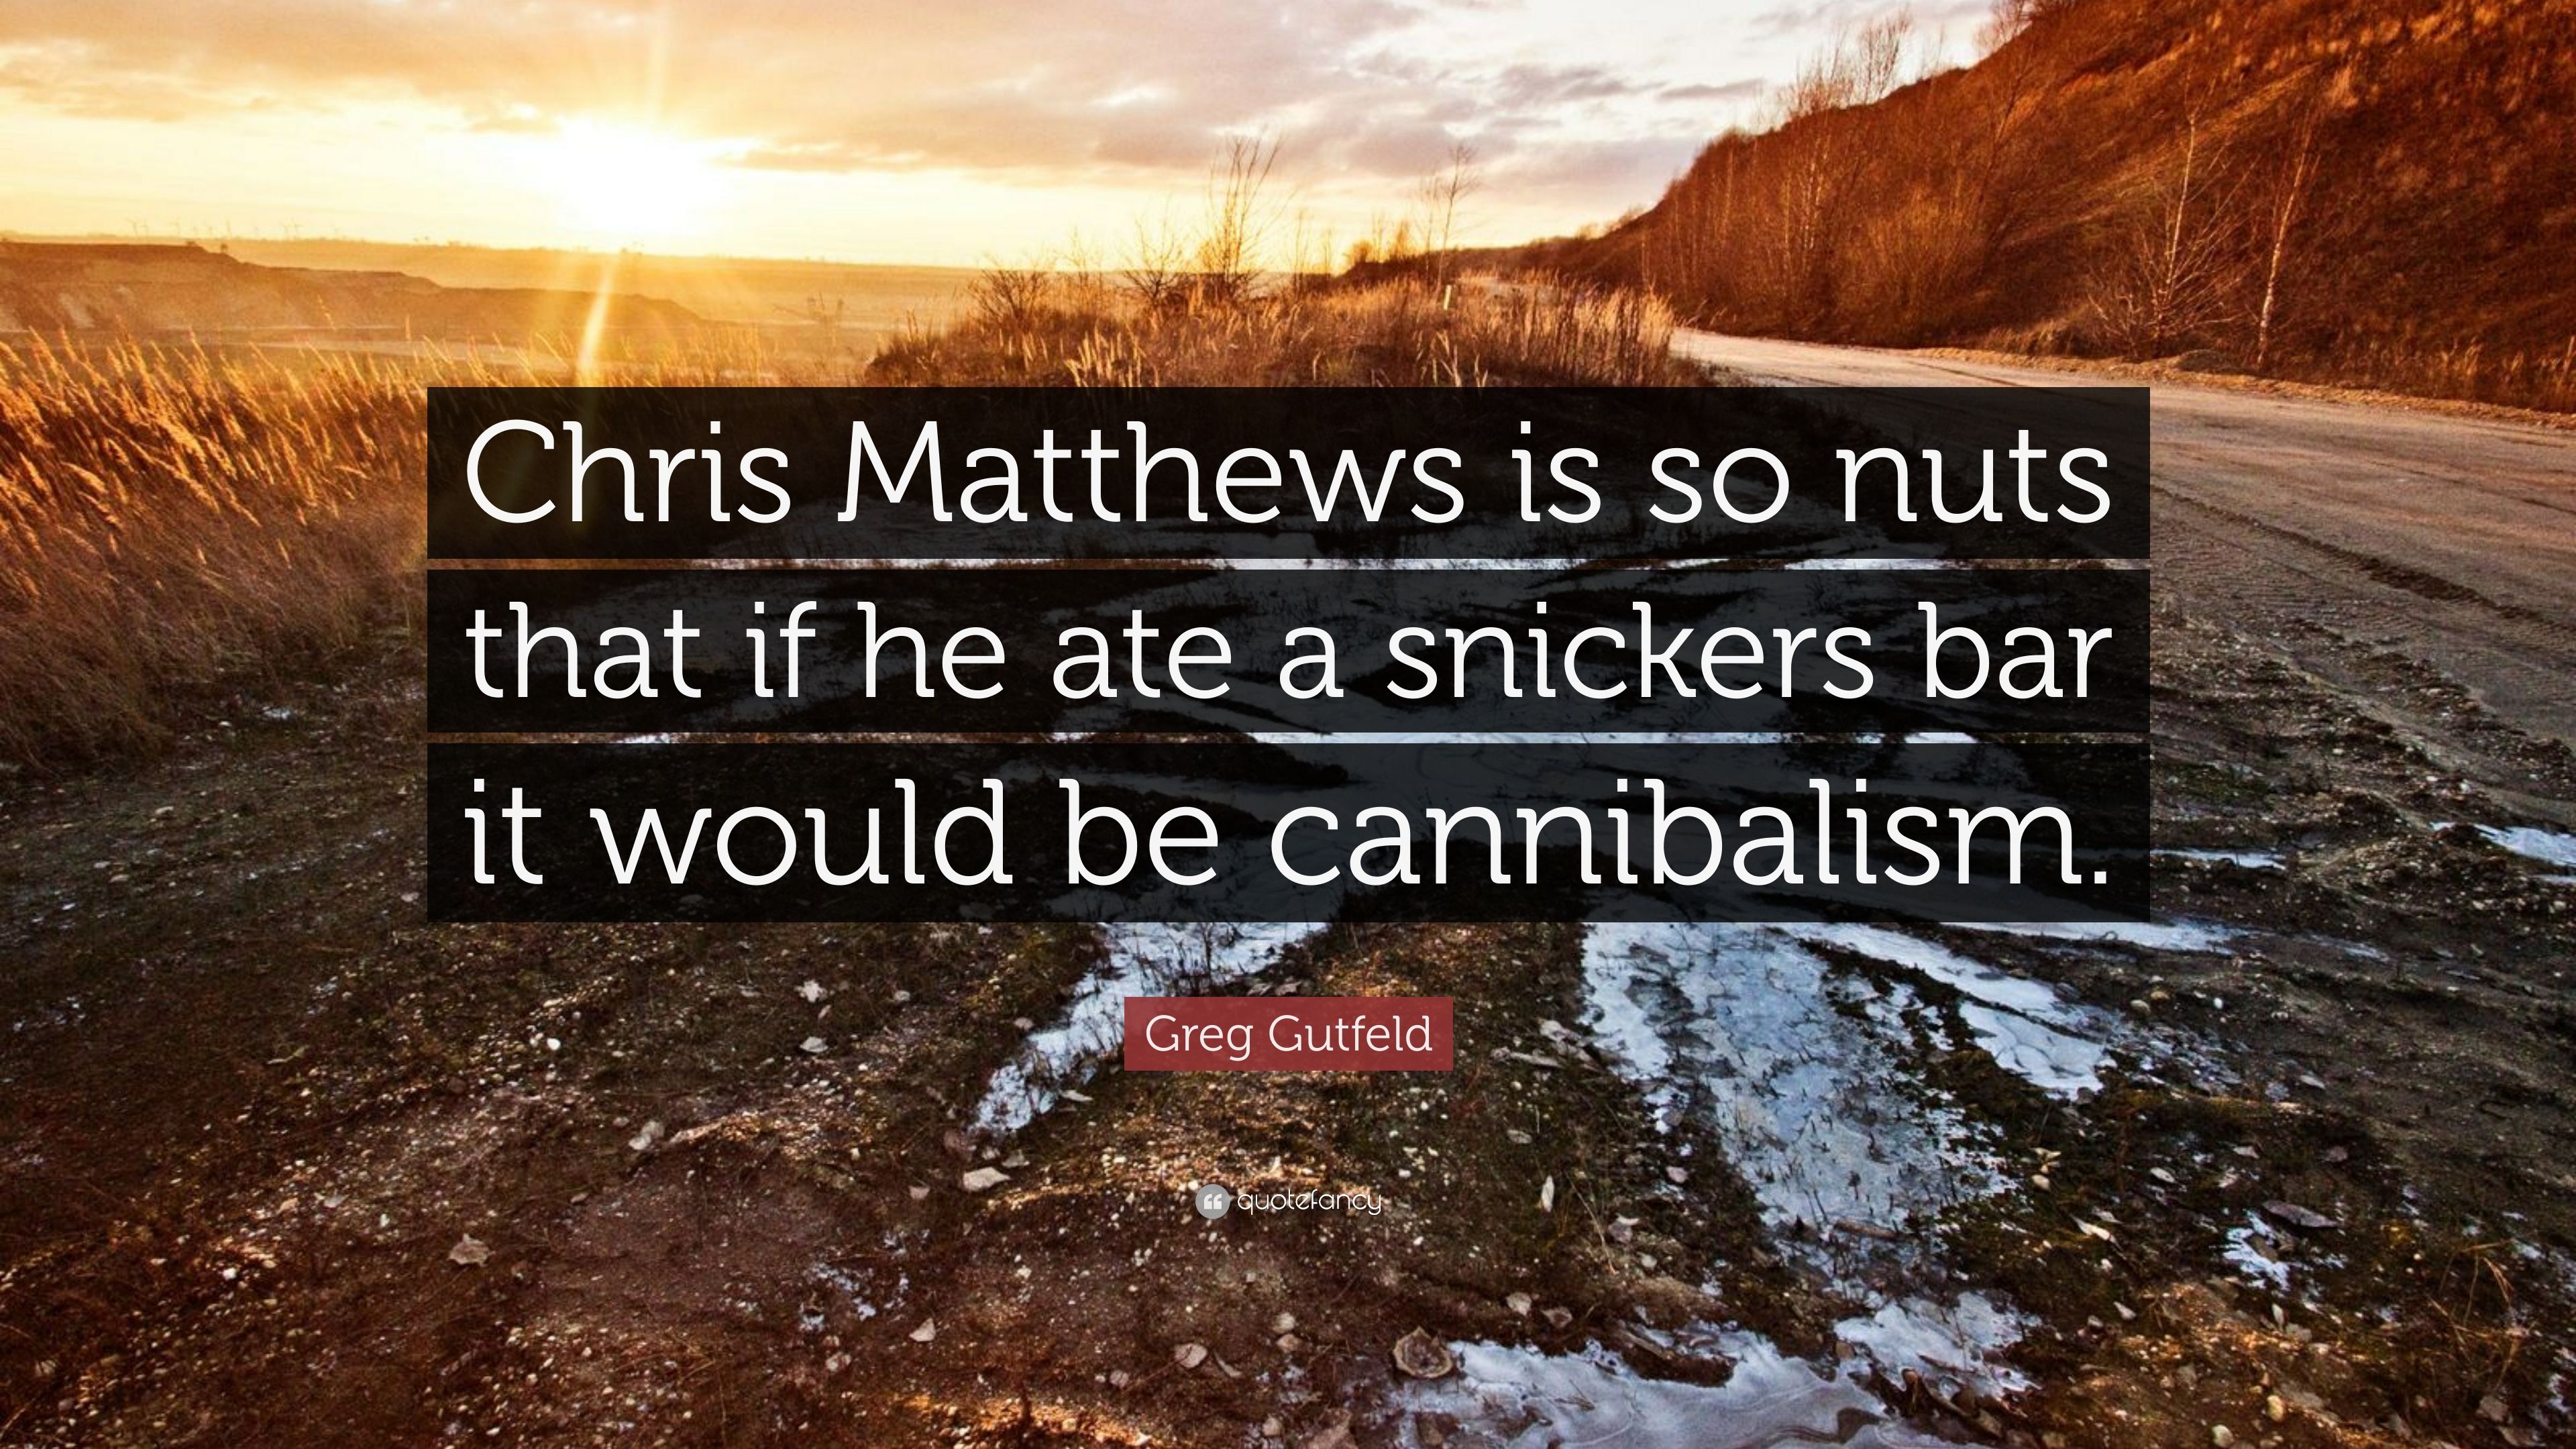 Greg Gutfeld Quote: “Chris Matthews is so nuts that if he ate a